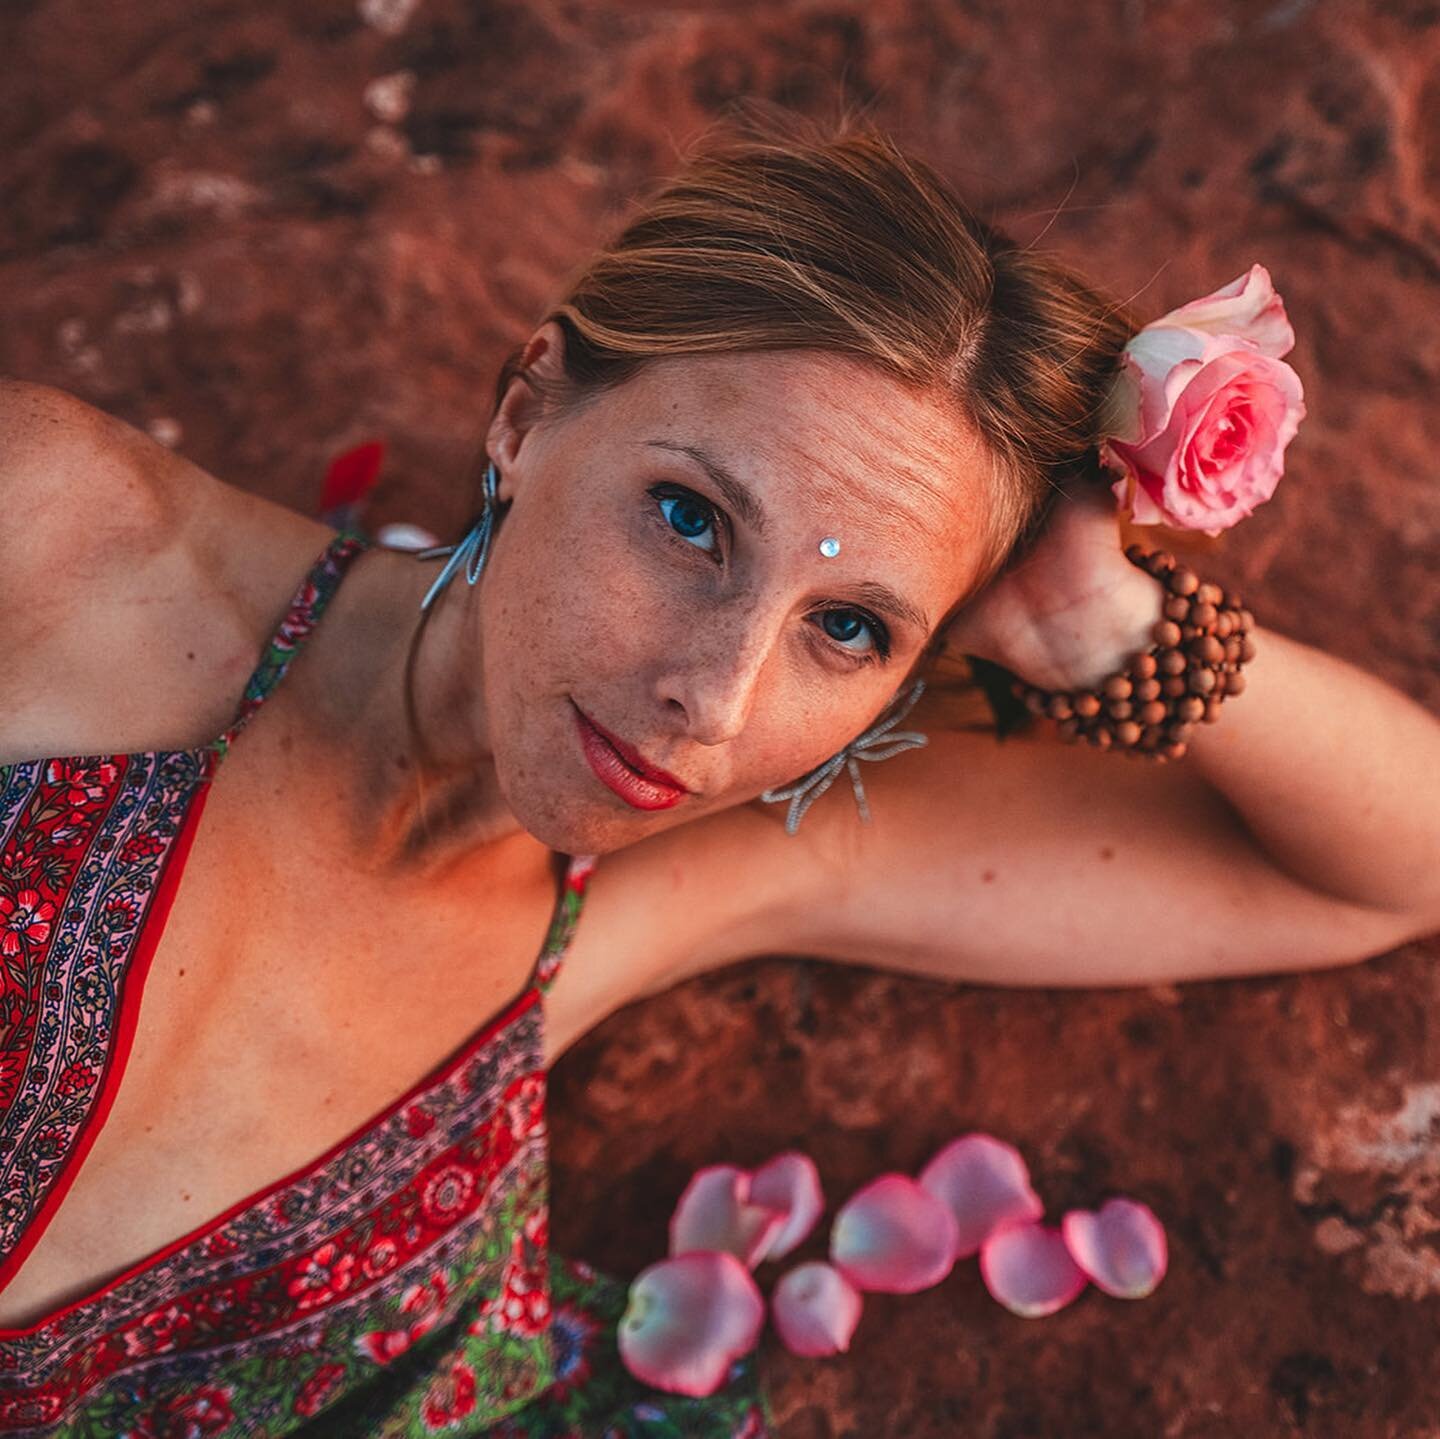 After 2 months in India I&rsquo;m home in Sedona with the gift of ✨new eyes✨ Rooted in actions of truth &amp; visions of beauty + making space for new, I am offering 20% off all Sedona shoots booked now until the April 8th New Moon 🌙 (redeem anytime